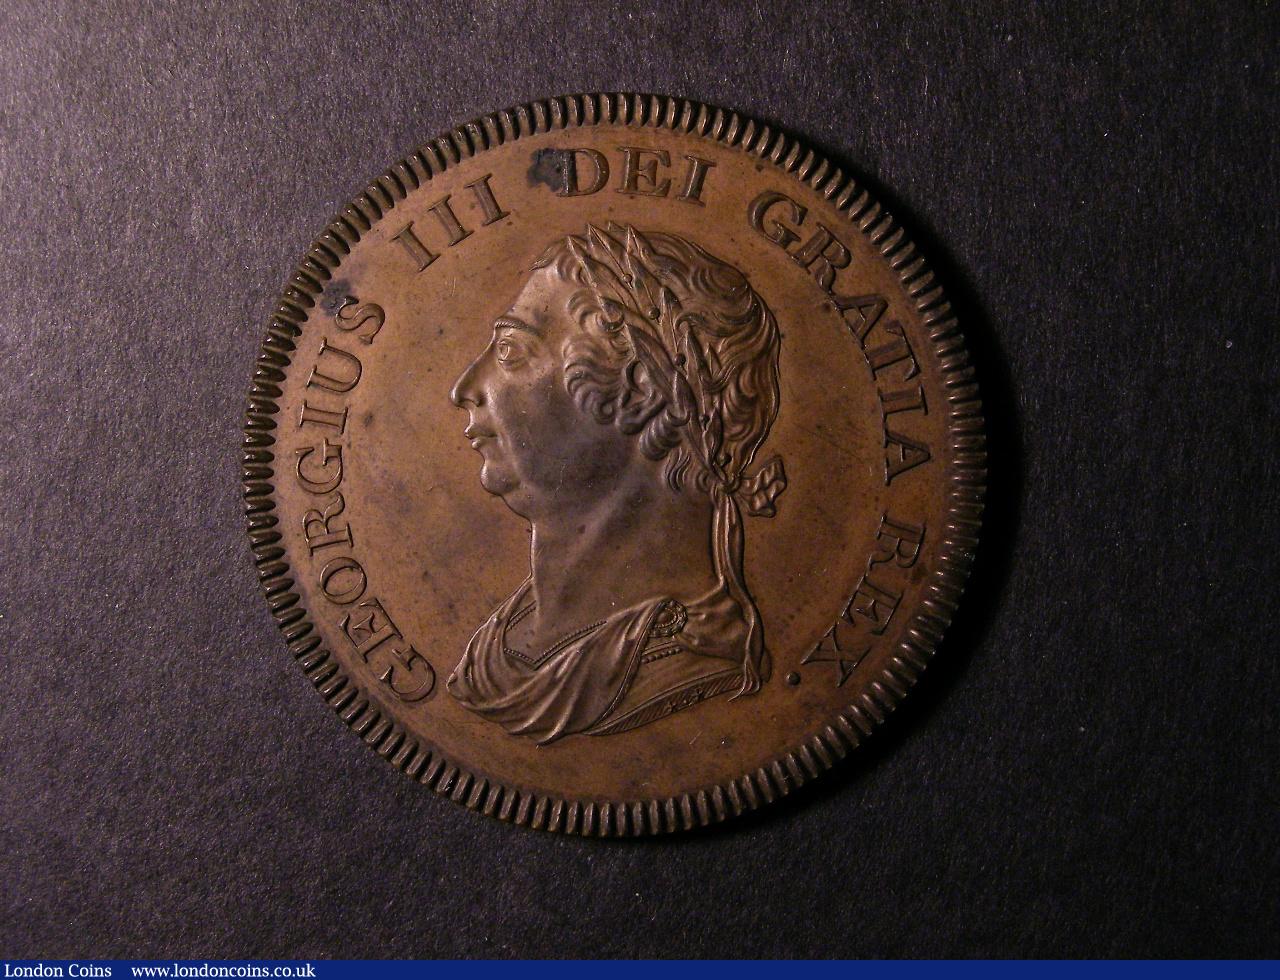 Dollar Bank of England 1811 Pattern in Copper ESC 205 Obverse K bust facing left, Reverse 5a BANK TOKEN 5S 6D 1811 in four lines within wreath nFDC with some subdued lustre and a couple of carbon spots on the obverse : English Coins : Auction 130 : Lot 1113